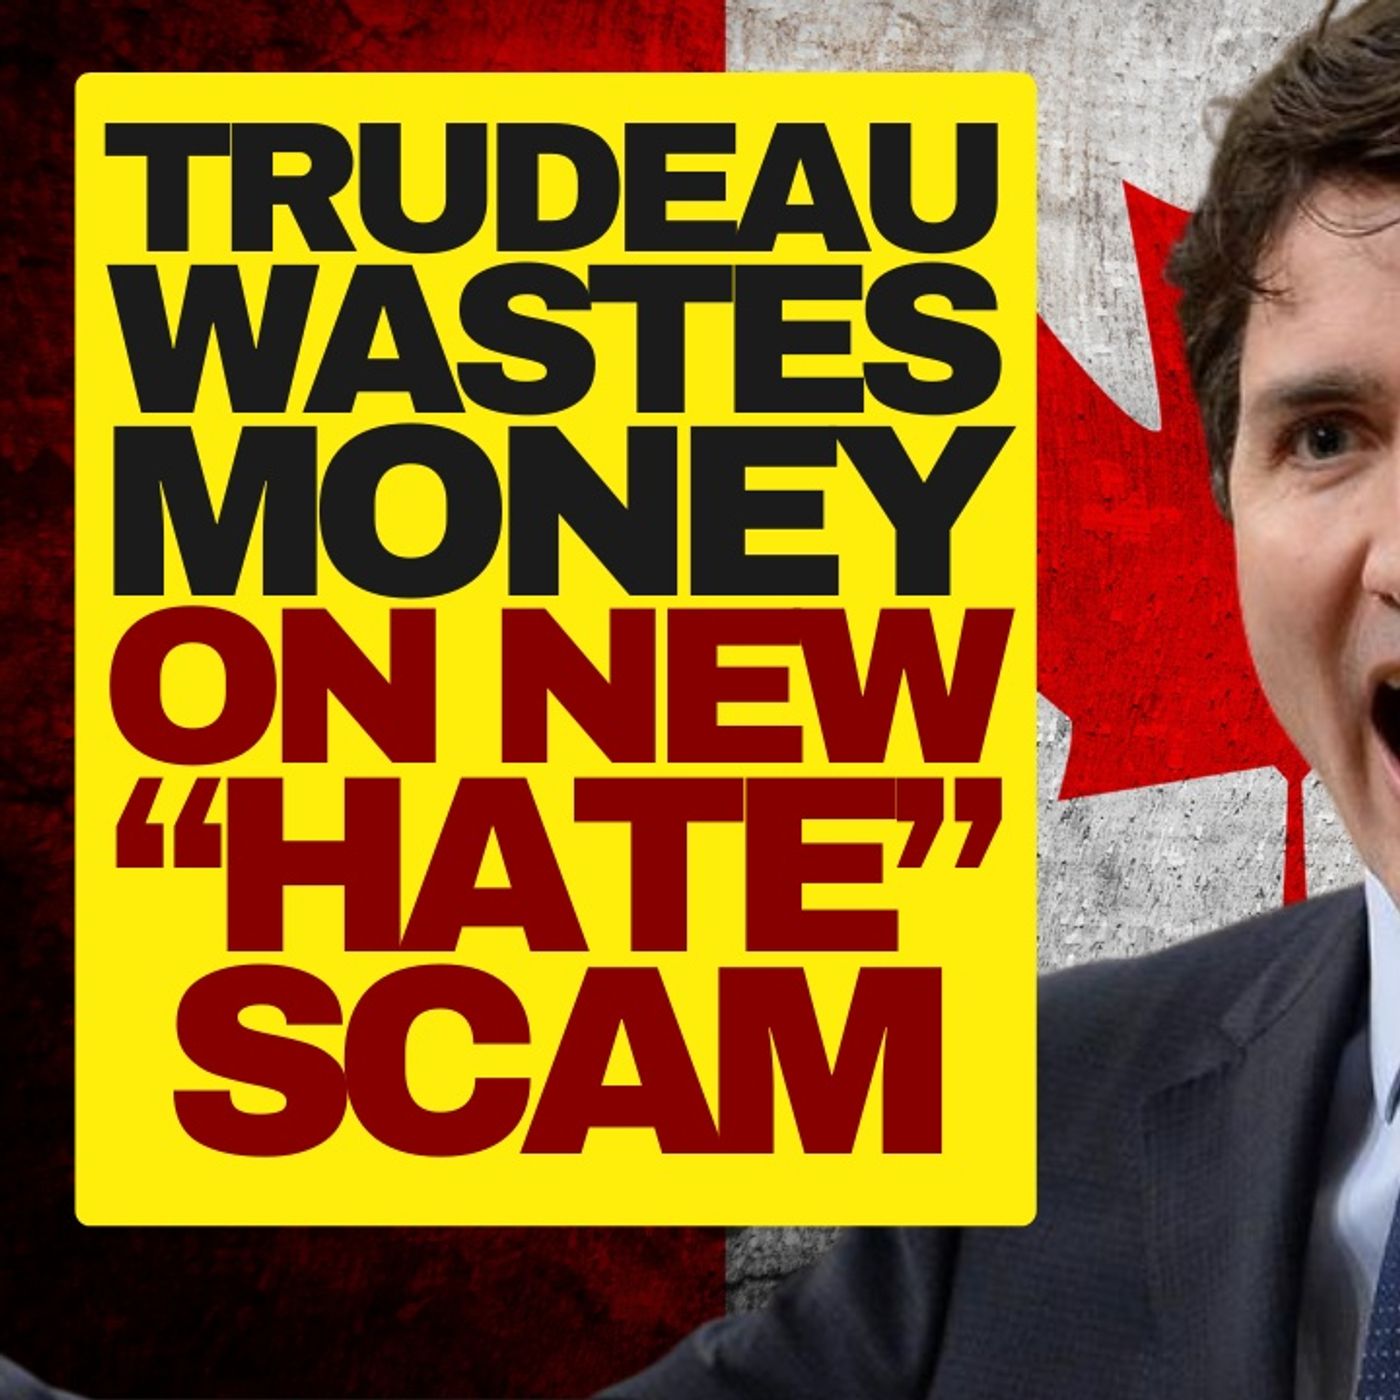 Trudeau Wastes Money On New Hate Scam